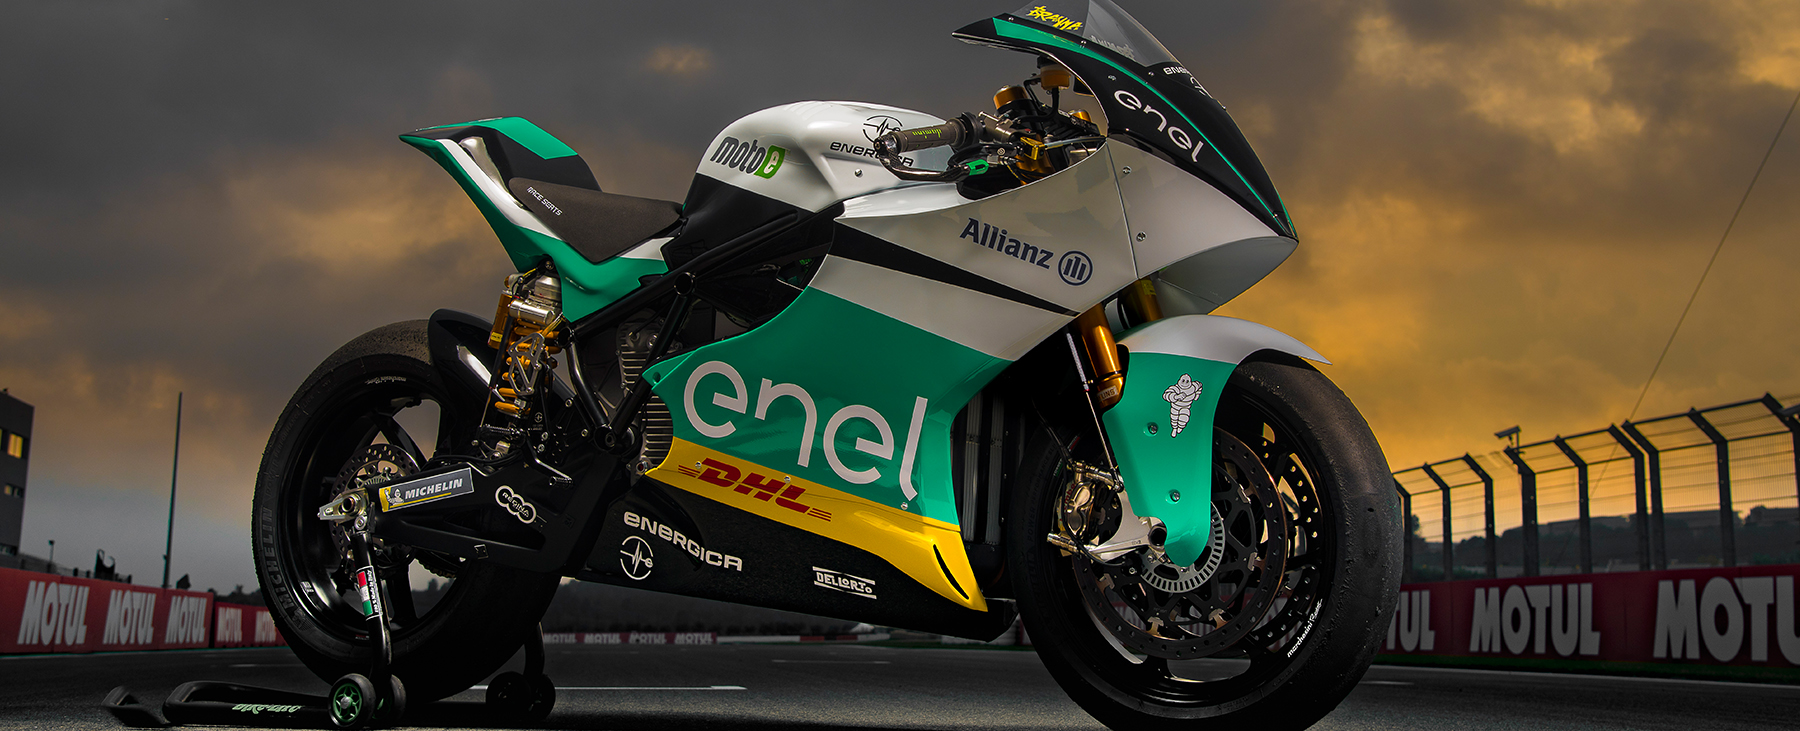 Energica Motor Company – The italian electric motorcycle manufacturer